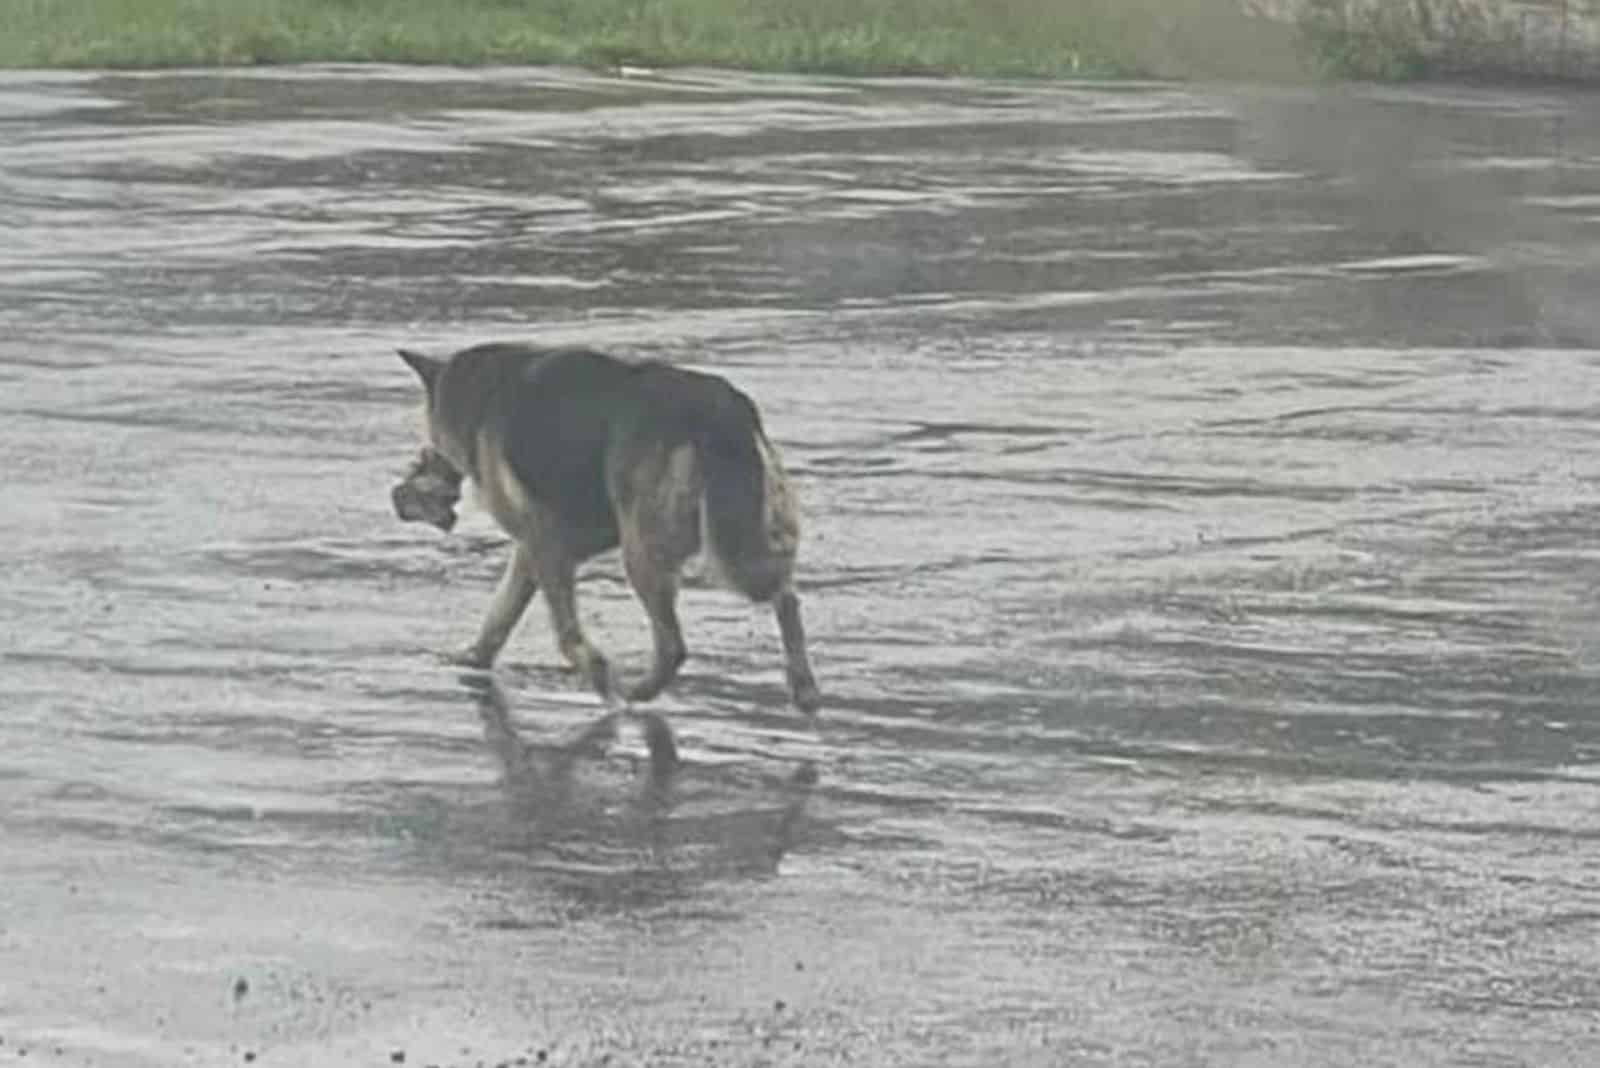 an abandoned dog walks the street with its stuffed toy in its mouth